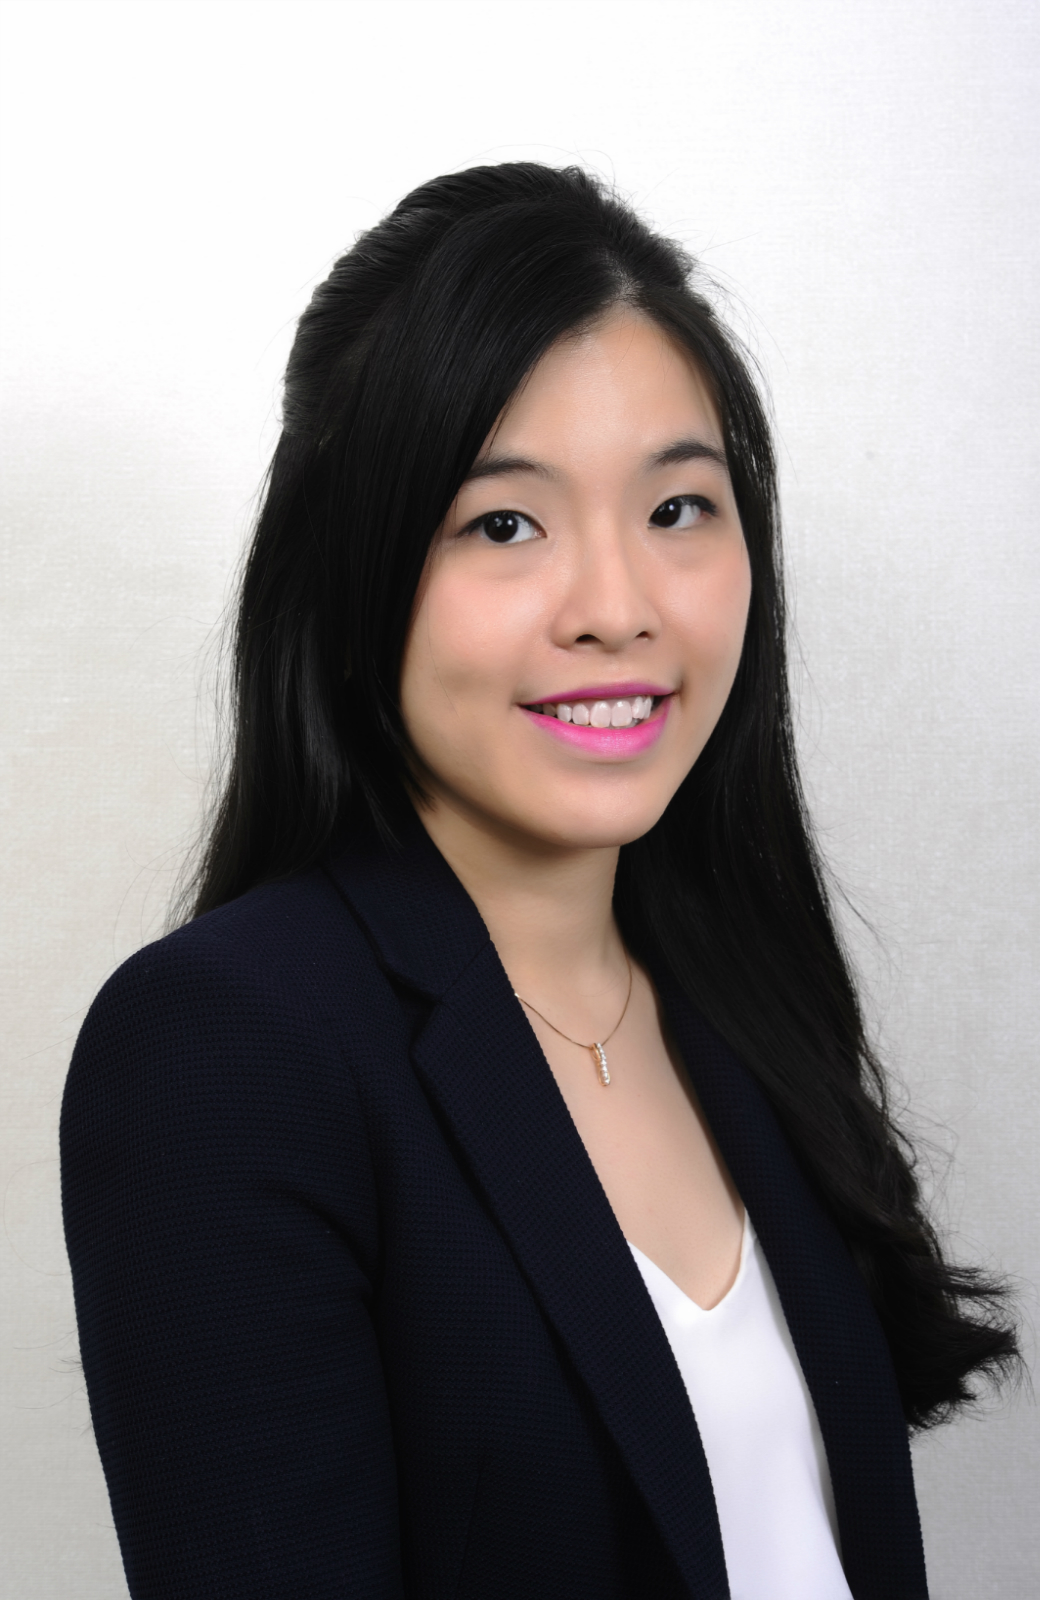 Linette Ong is now an Account Manager in Singapore, where she specialises in financial and corporate communications.